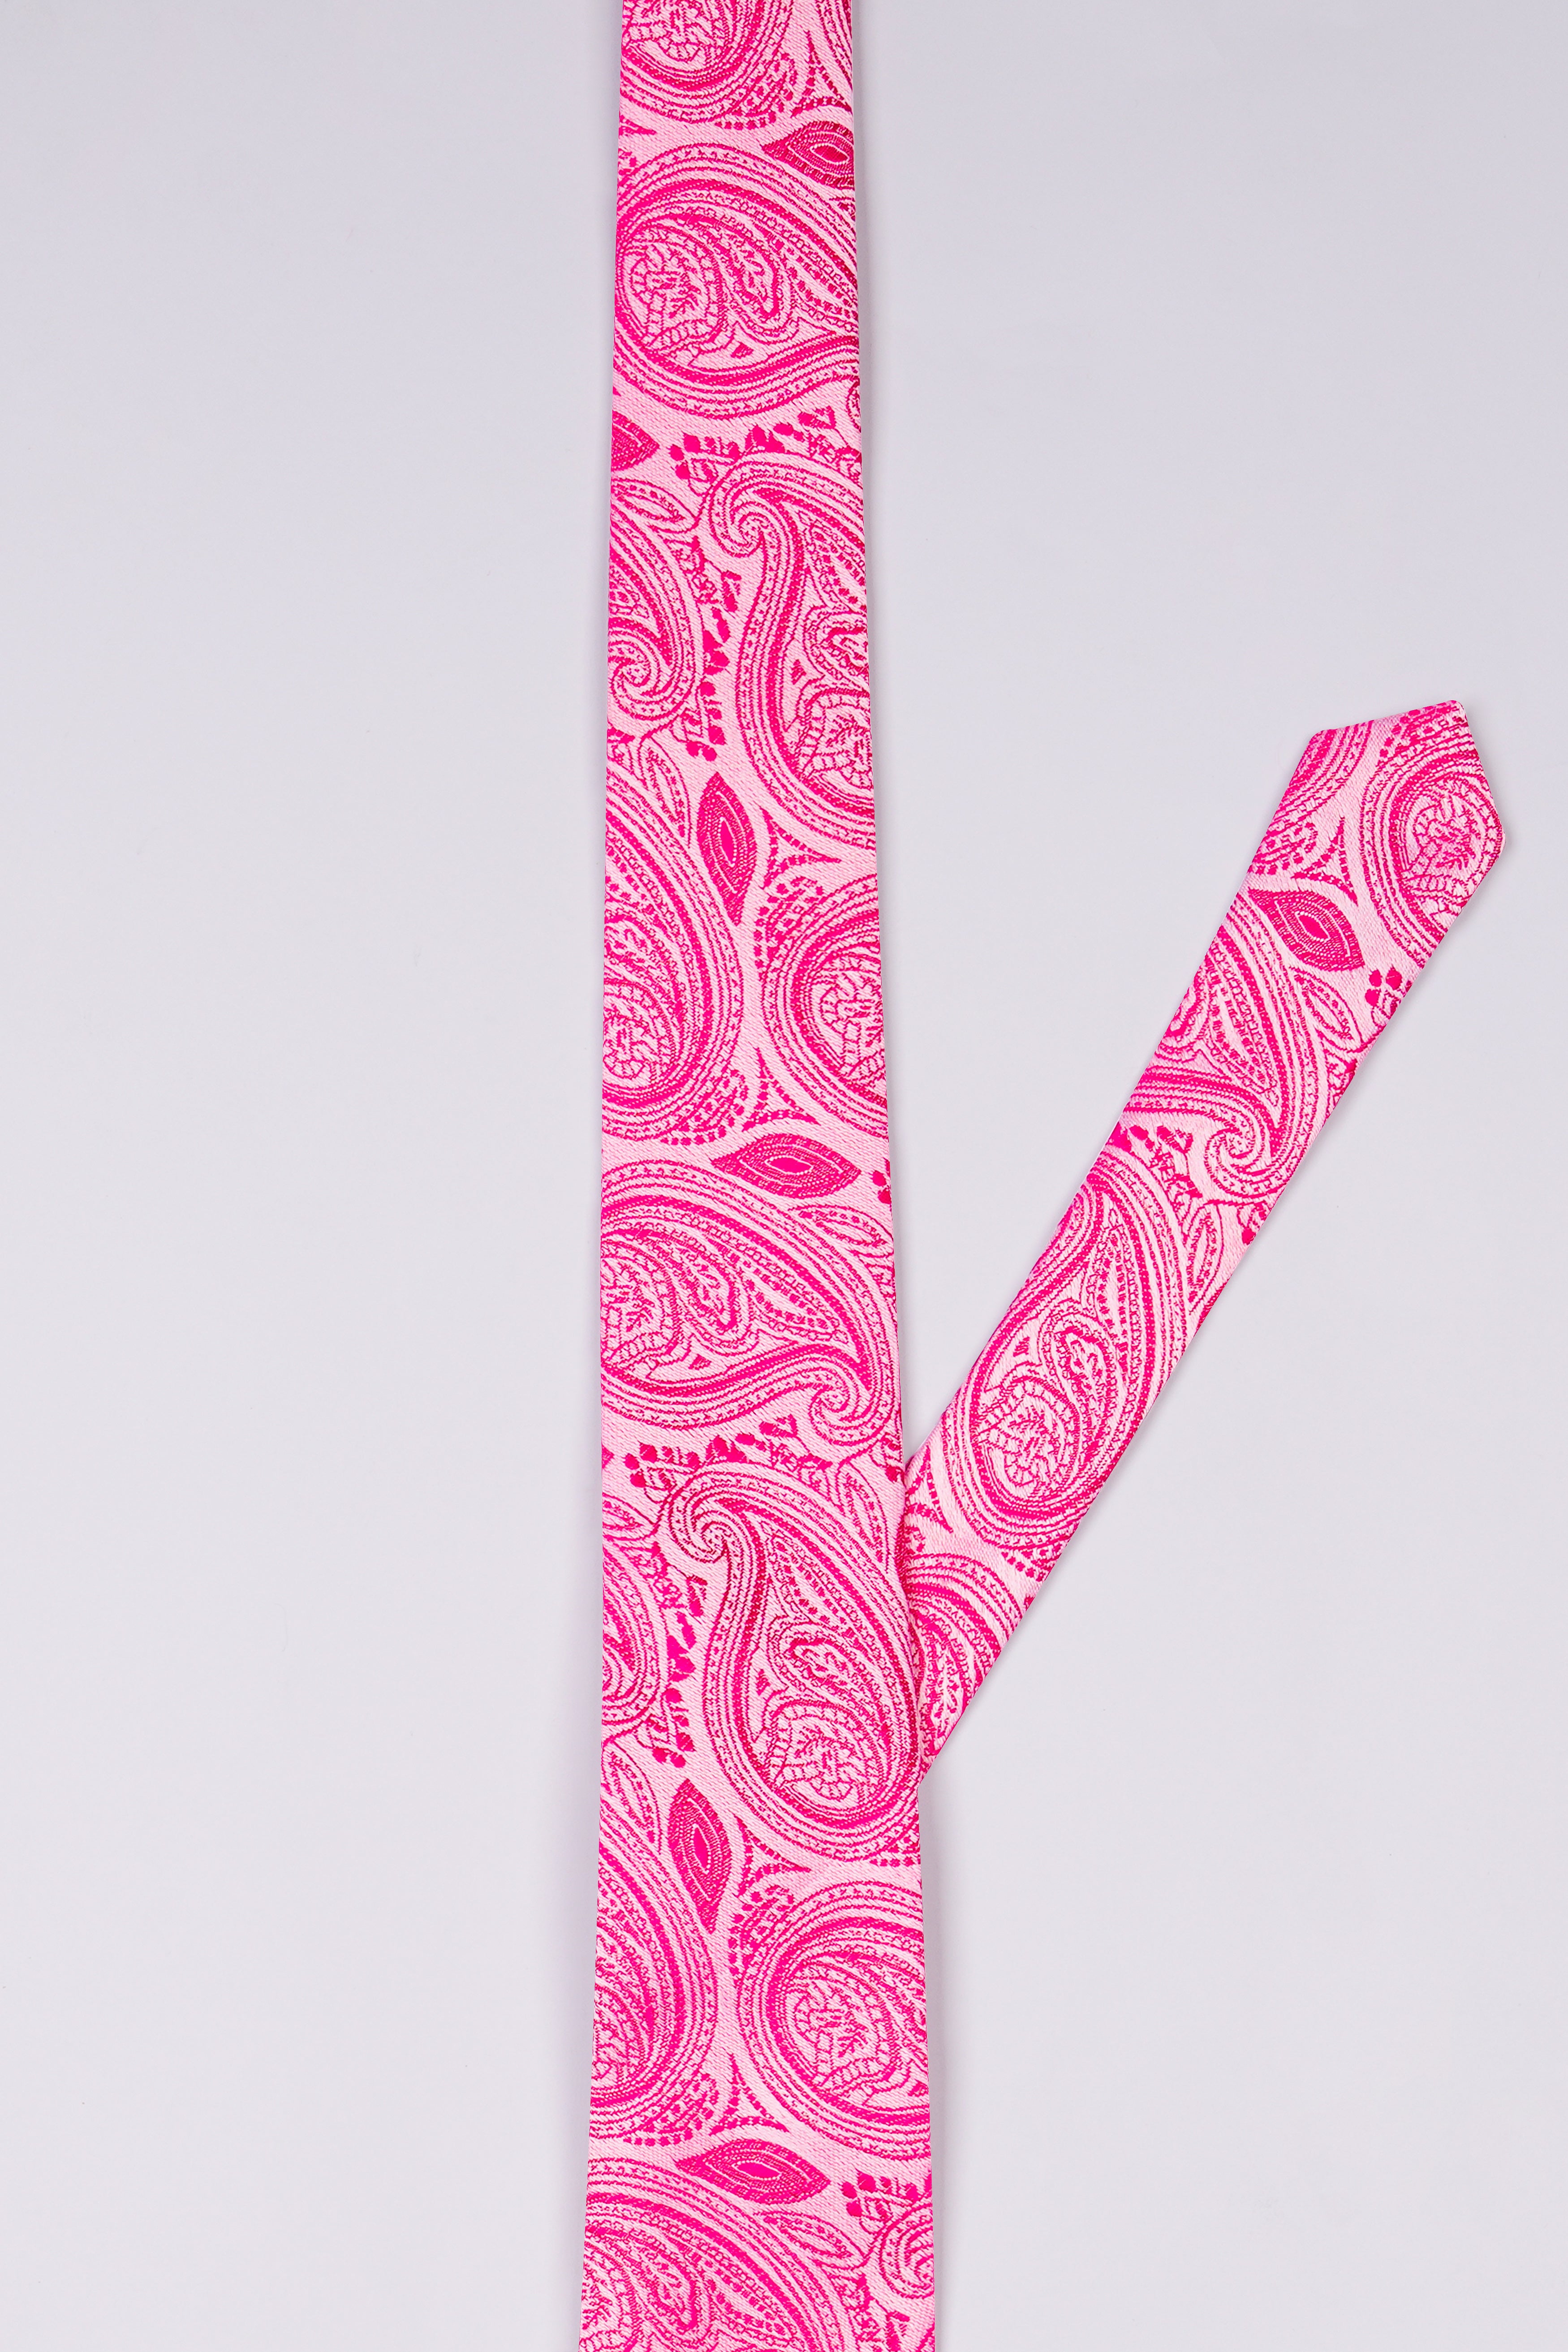 Magenta Pink with Illusion Light Pink Paisley Jacquard Tie with Pocket Square  TP060